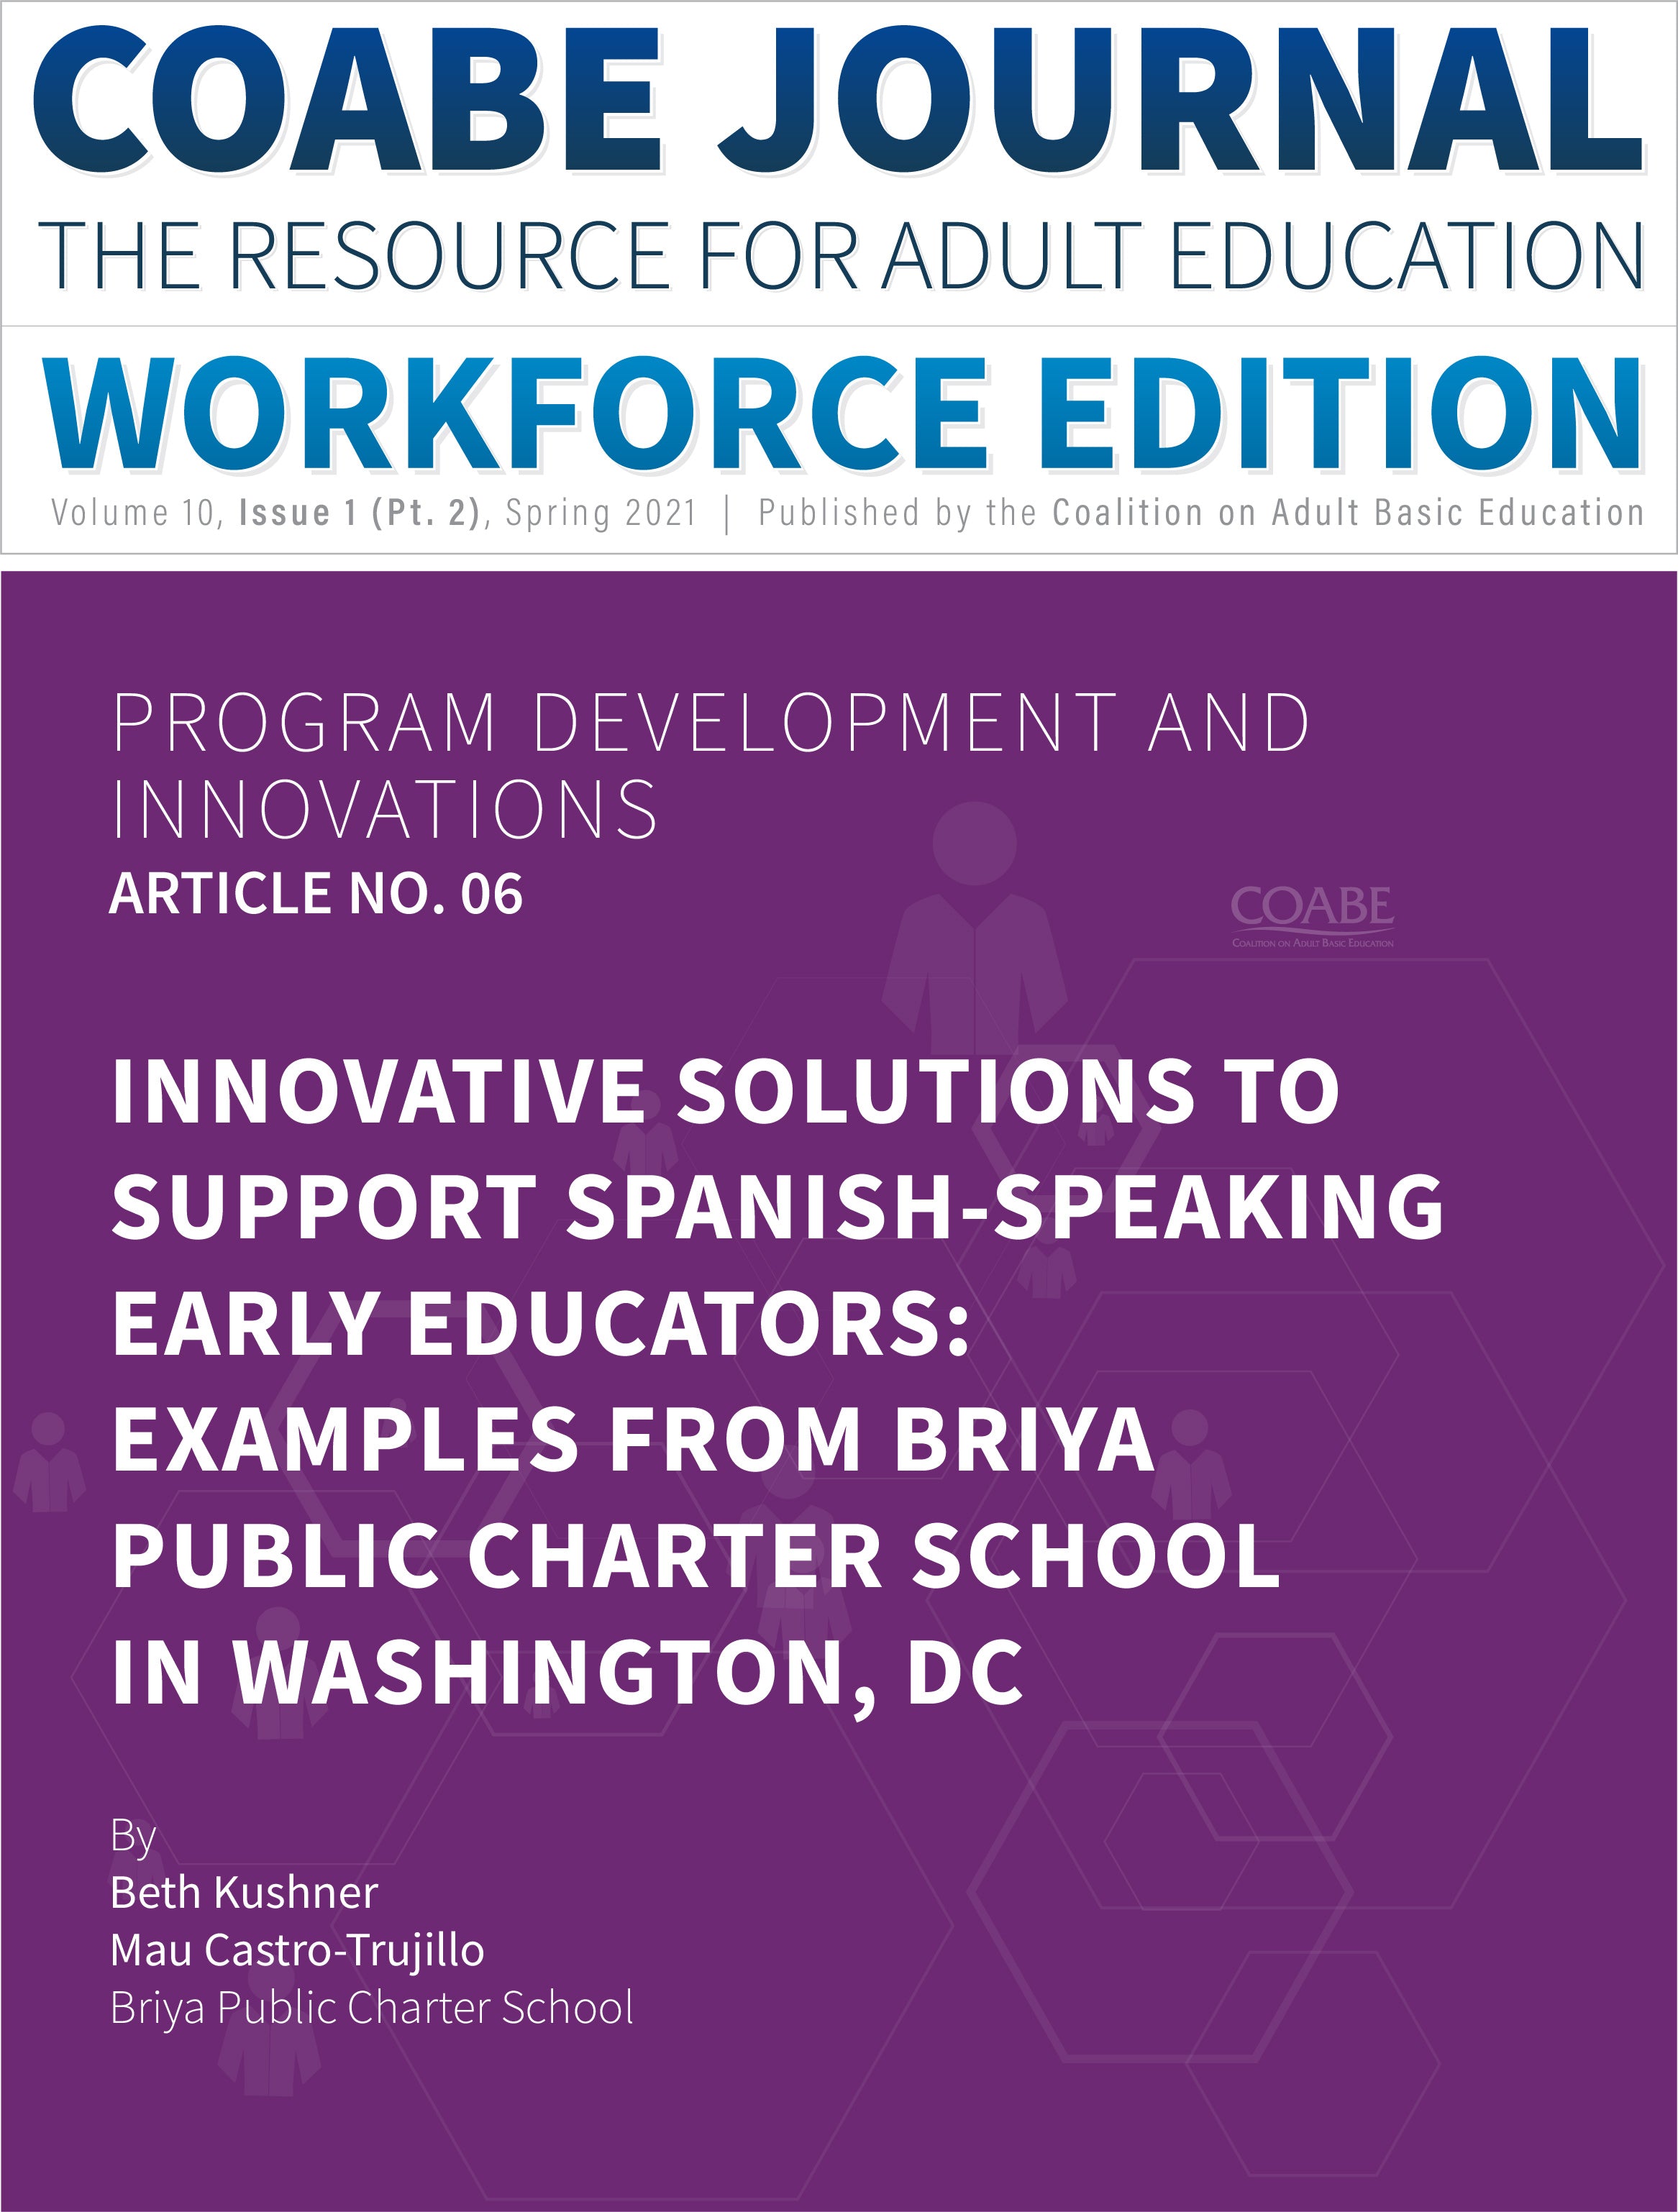 Article 06 :: Innovative Solutions To Support Spanish-Speaking Early Educators: Examples From Briya Public Charter School In Washington, DC